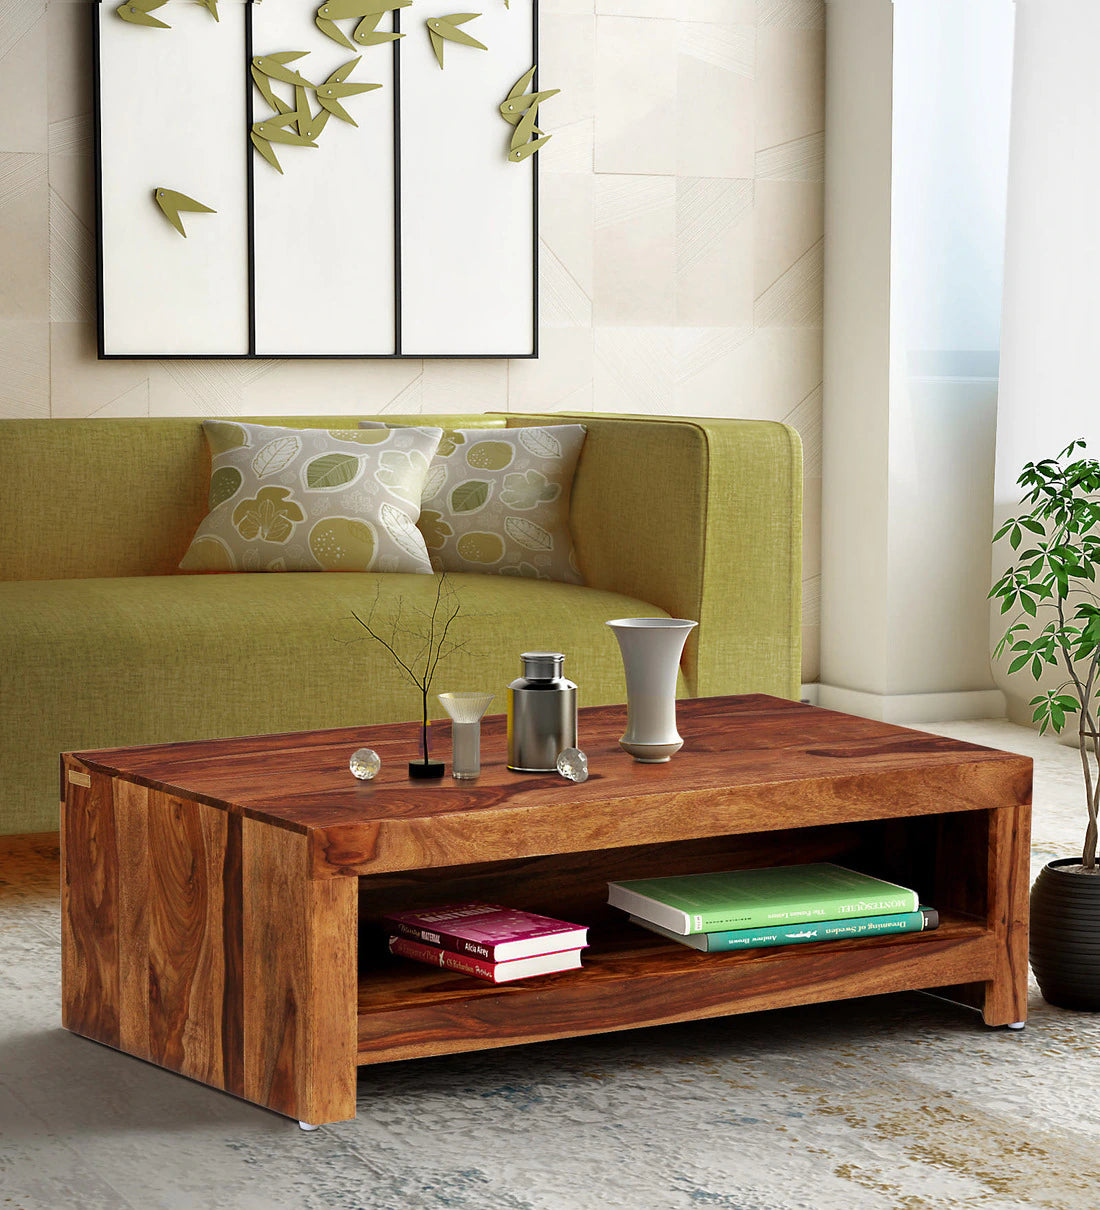 Acro Coffee Table Rectangle Center Table Wooden For Living Room - Rajwada Furnish